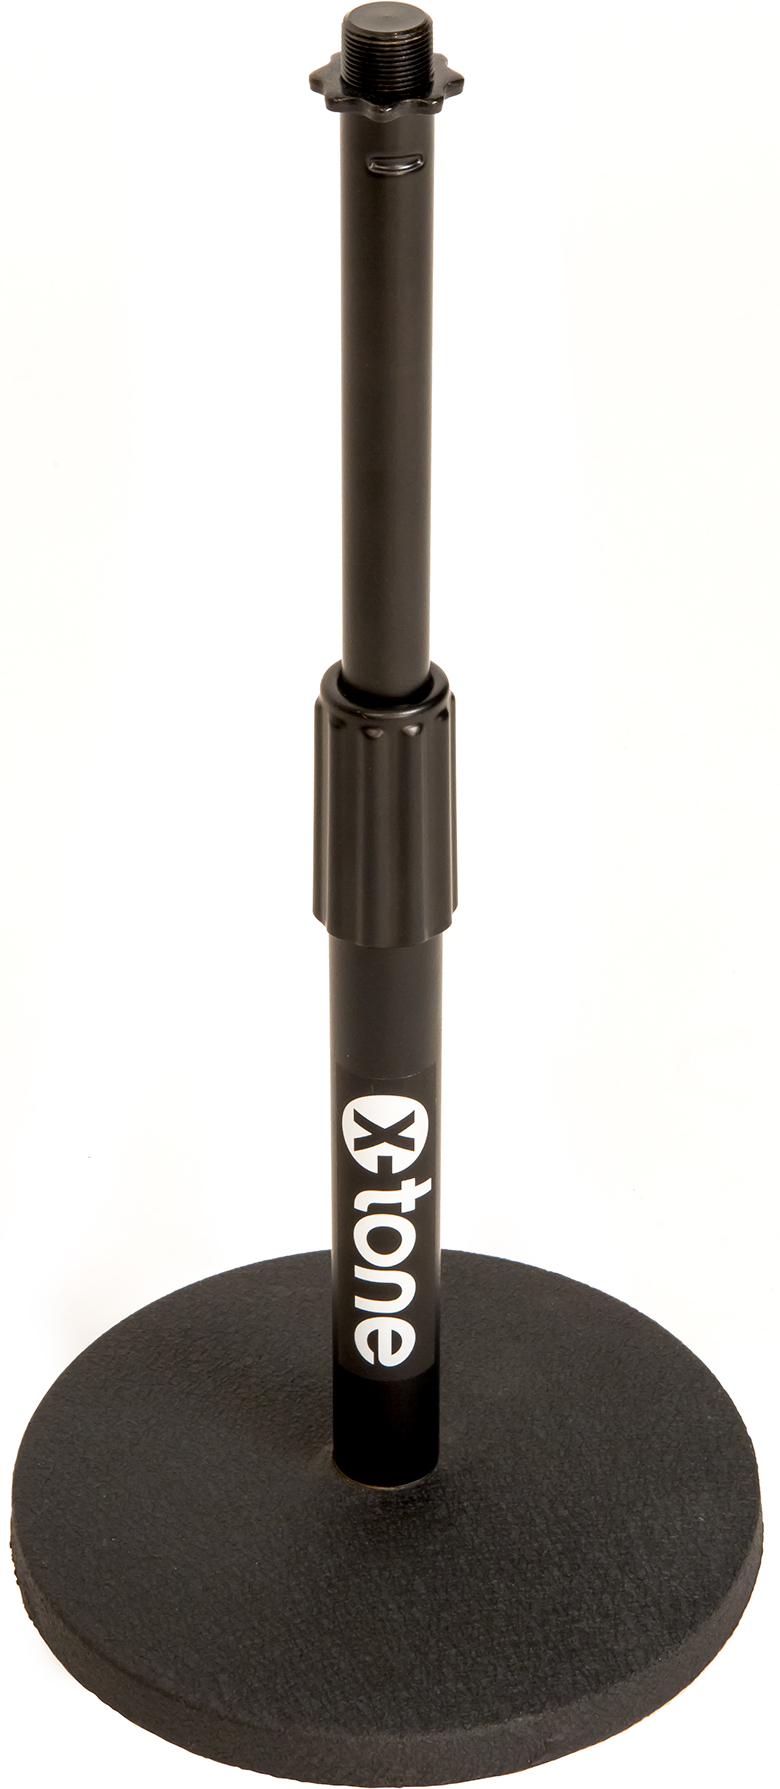 X-tone Xh 6010 Pied Micro De Table - Microphone stand - Main picture